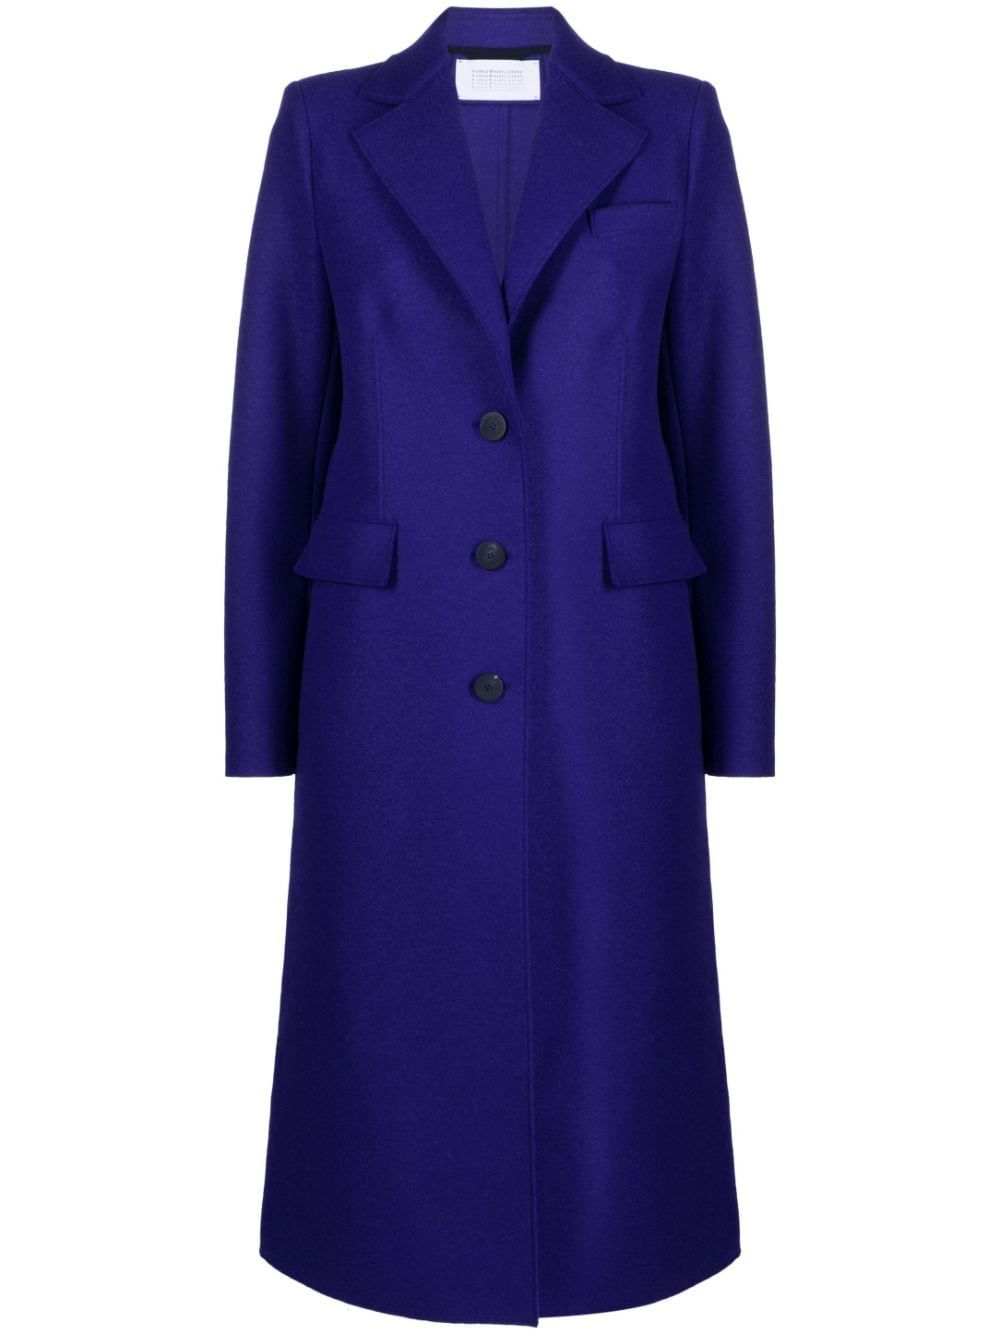 HARRIS WHARF LONDON WOMEN SINGLE BREASTED COAT WITH SHOULDER PADS PRESSED WOOL,A1601MLK